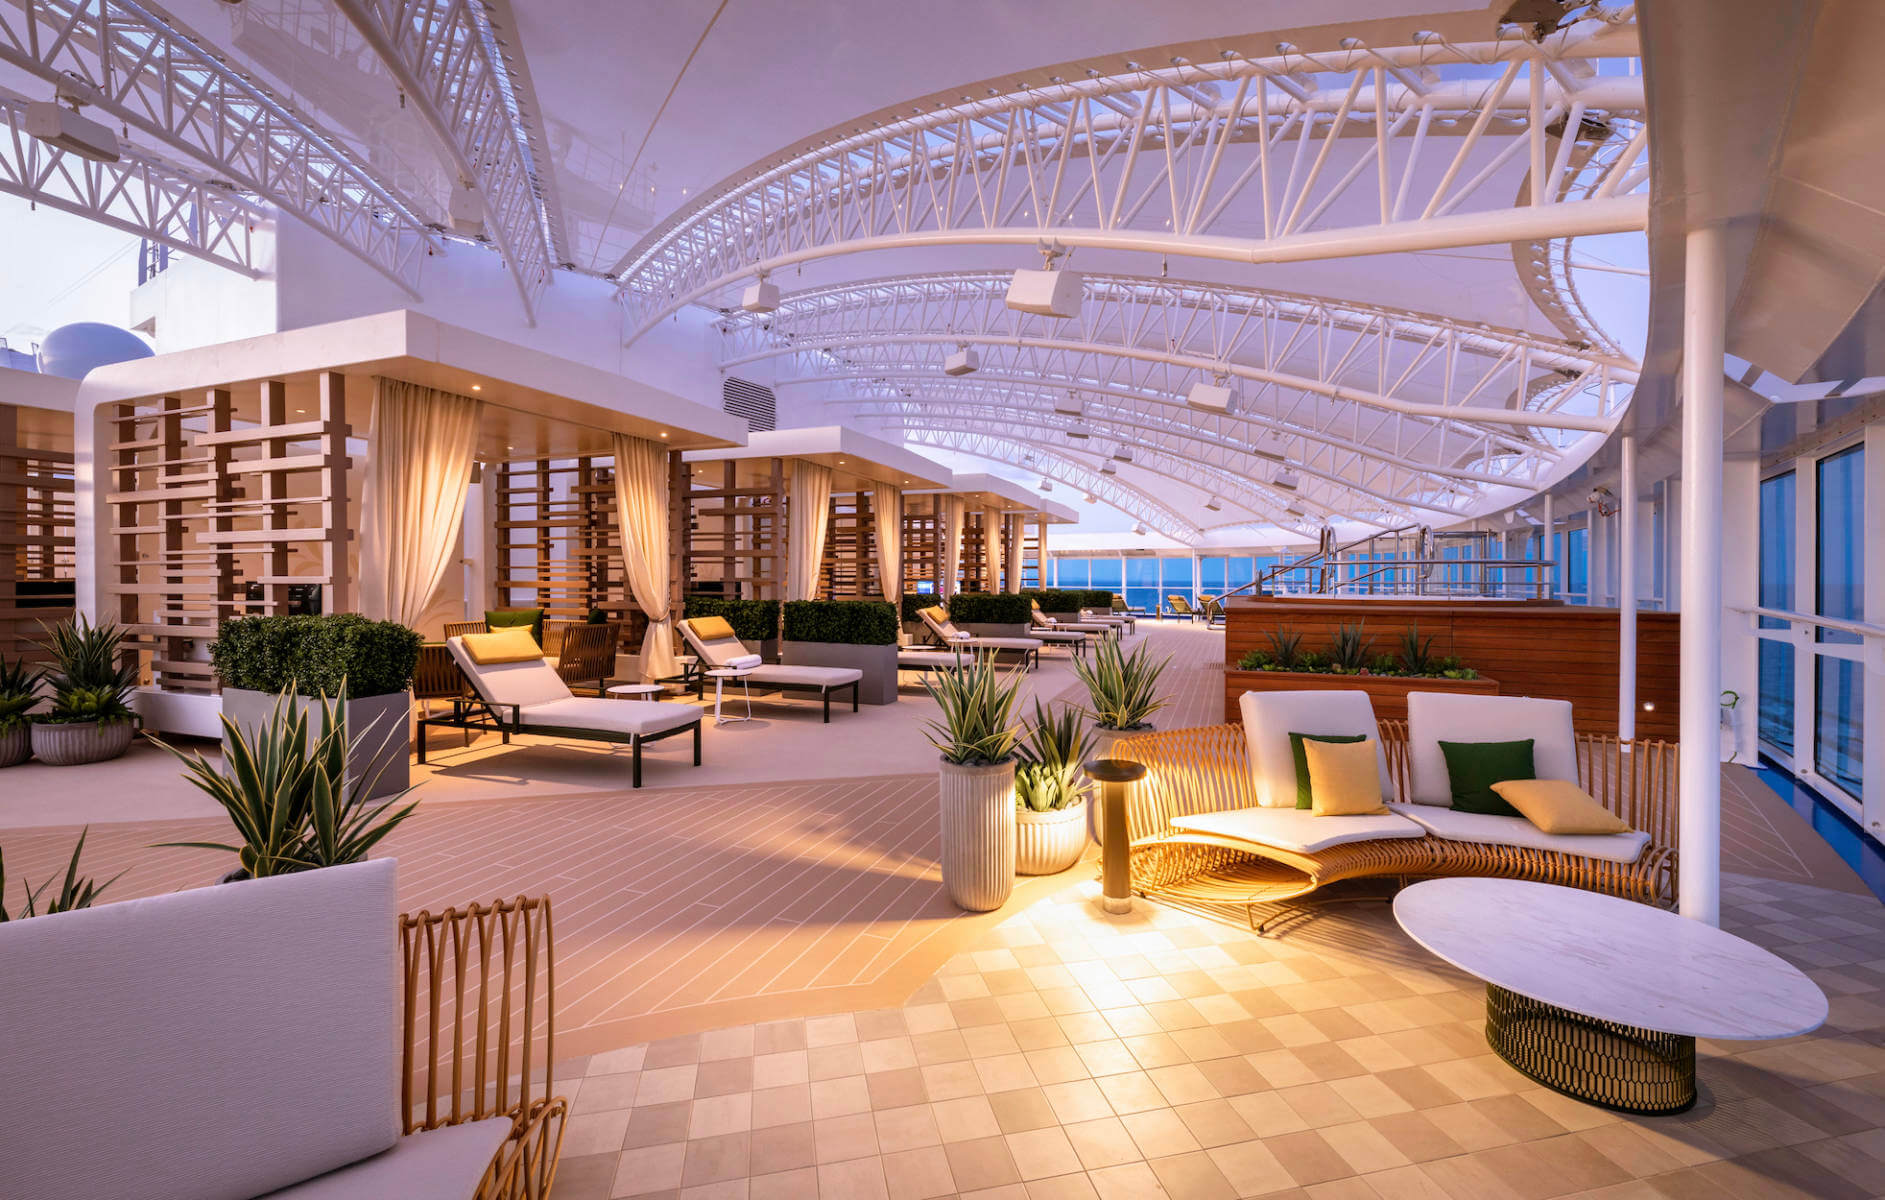 LUXURIA LIFESTYLE SPAIN WELCOMES PRINCESS CRUISES - CRUISE WITH CONFIDENCE